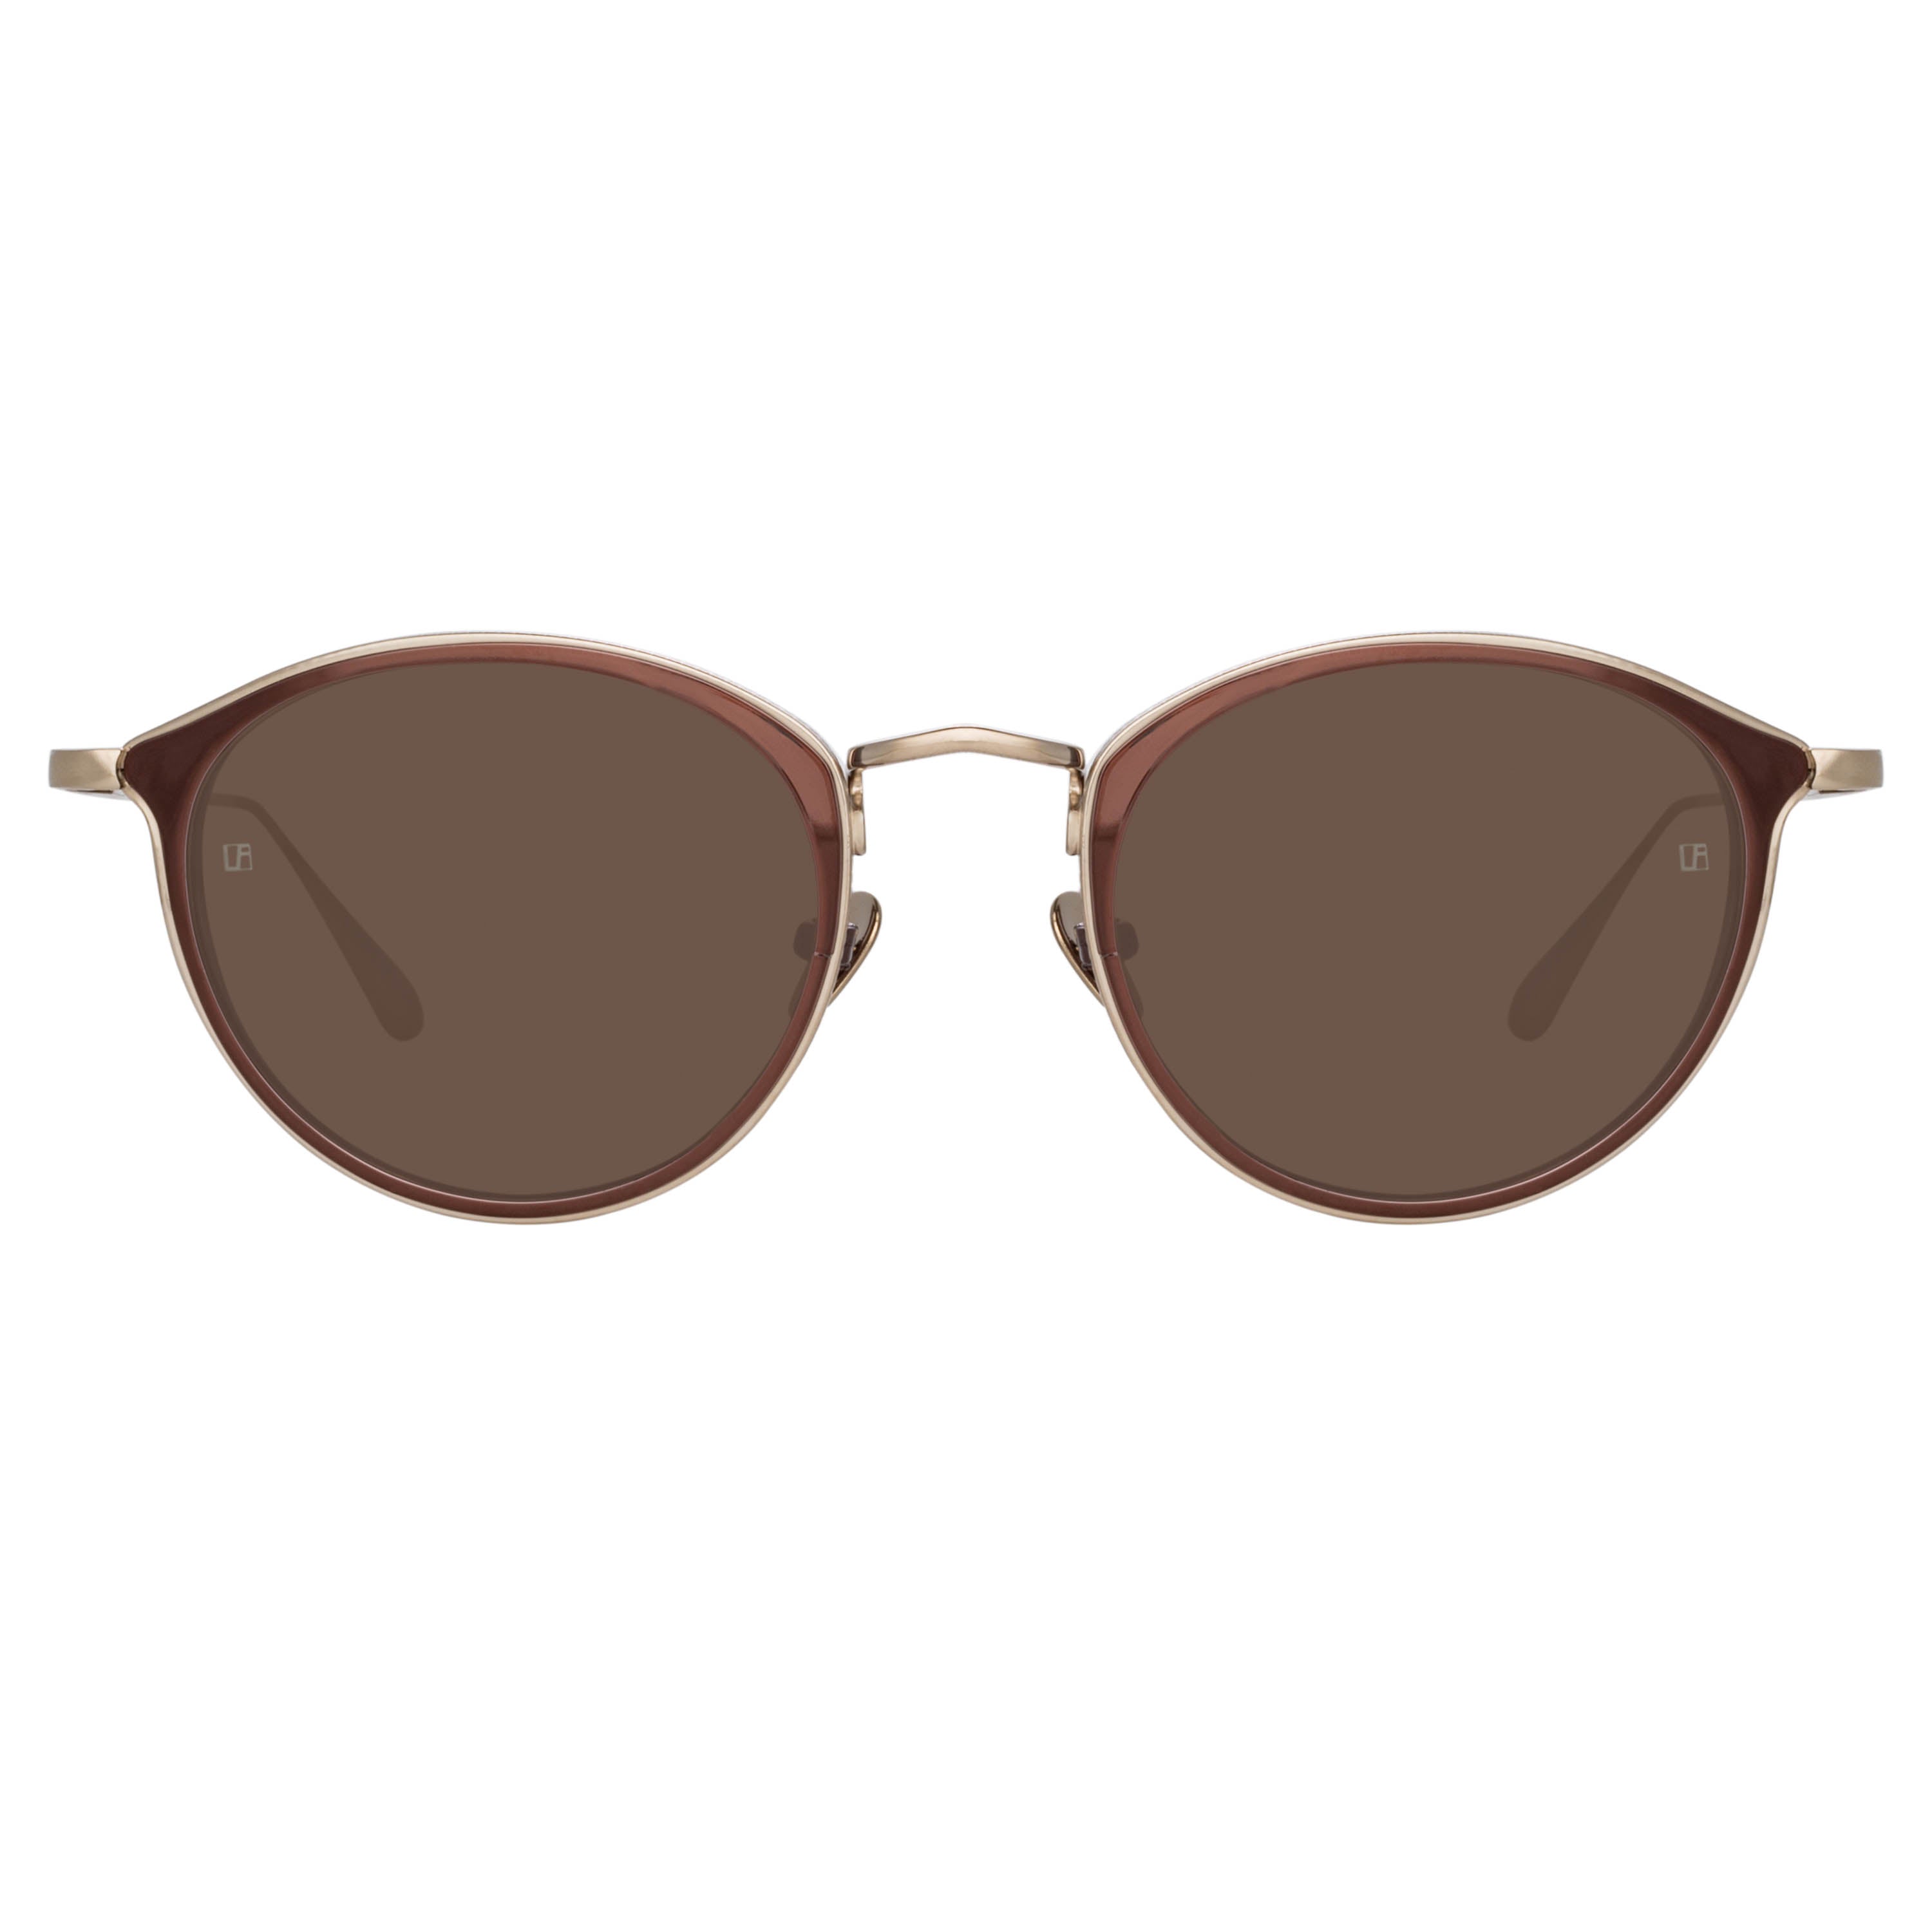 Luis Oval Sunglasses in Light Gold and Brown (Men’s)